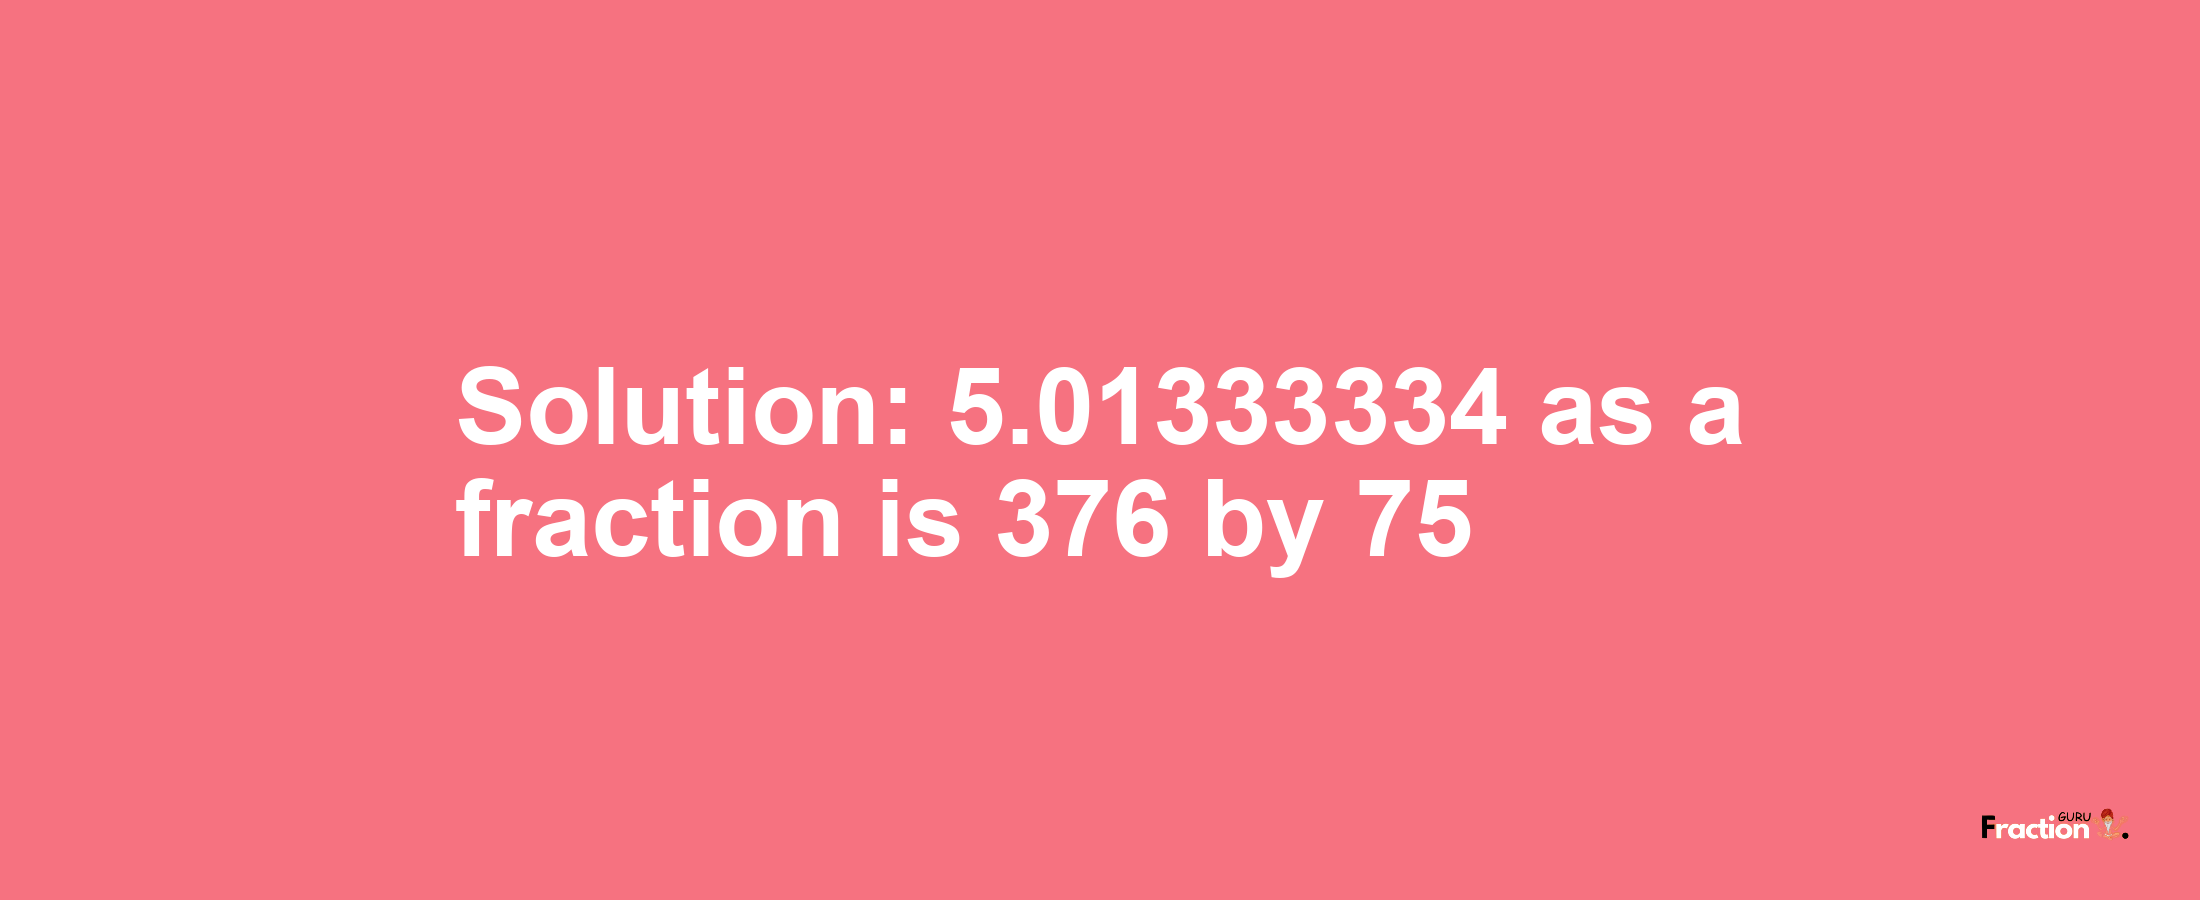 Solution:5.01333334 as a fraction is 376/75